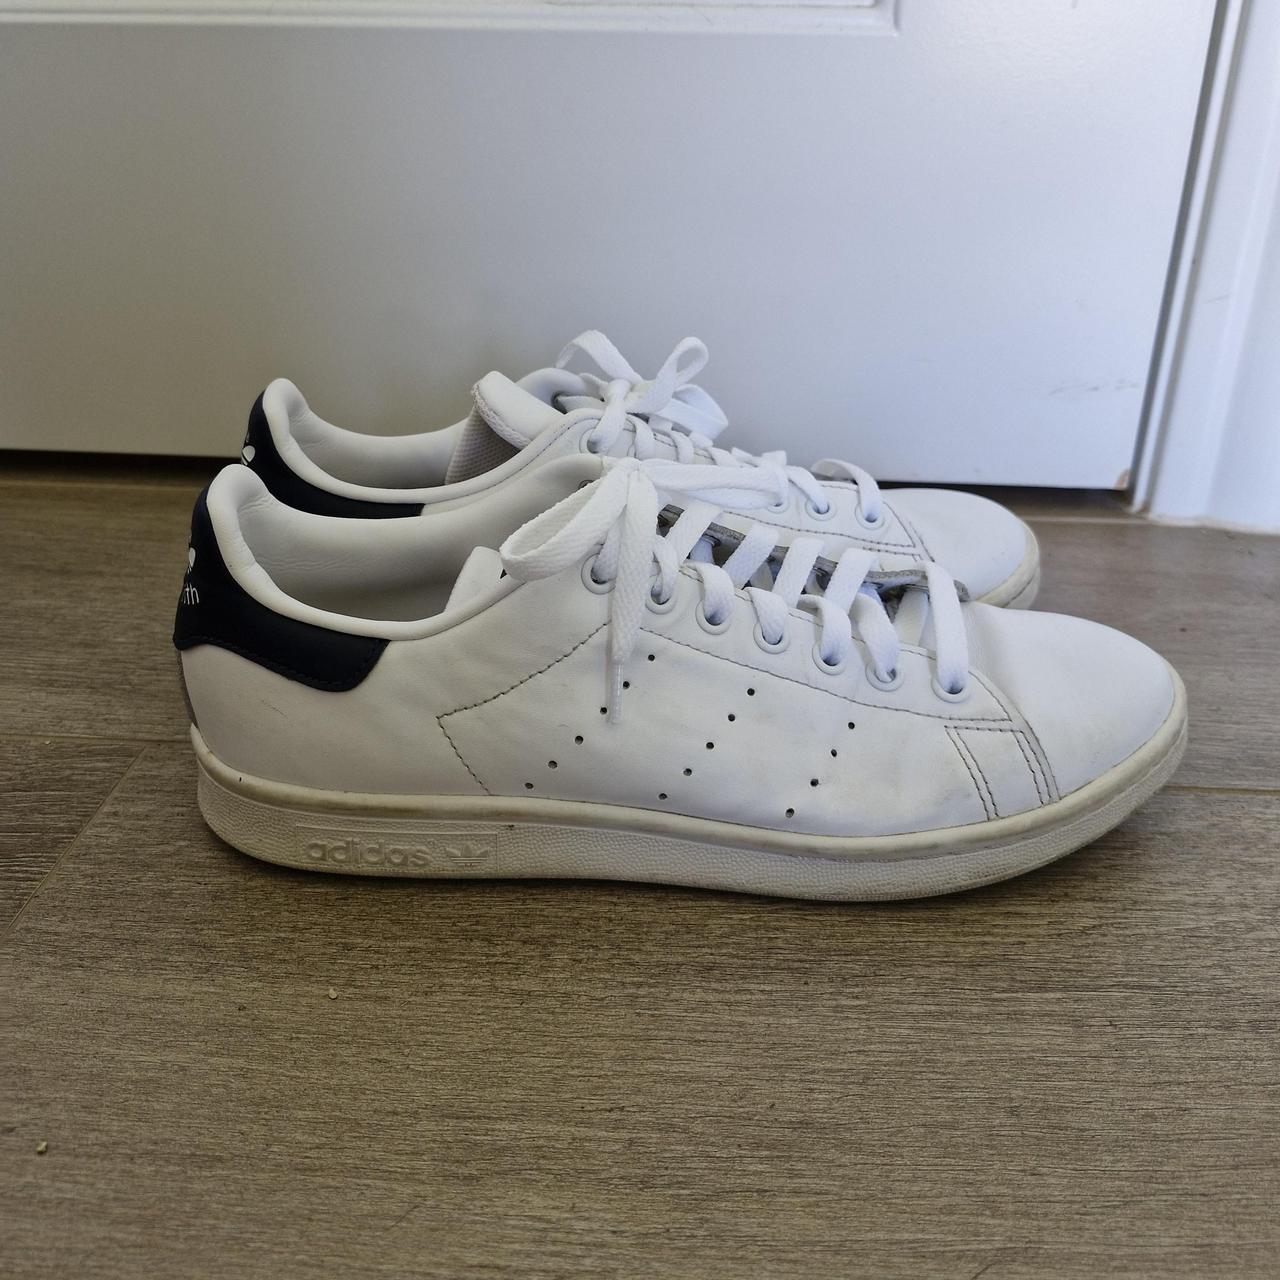 Stan Smith's good condition size UK 7.5 - Depop